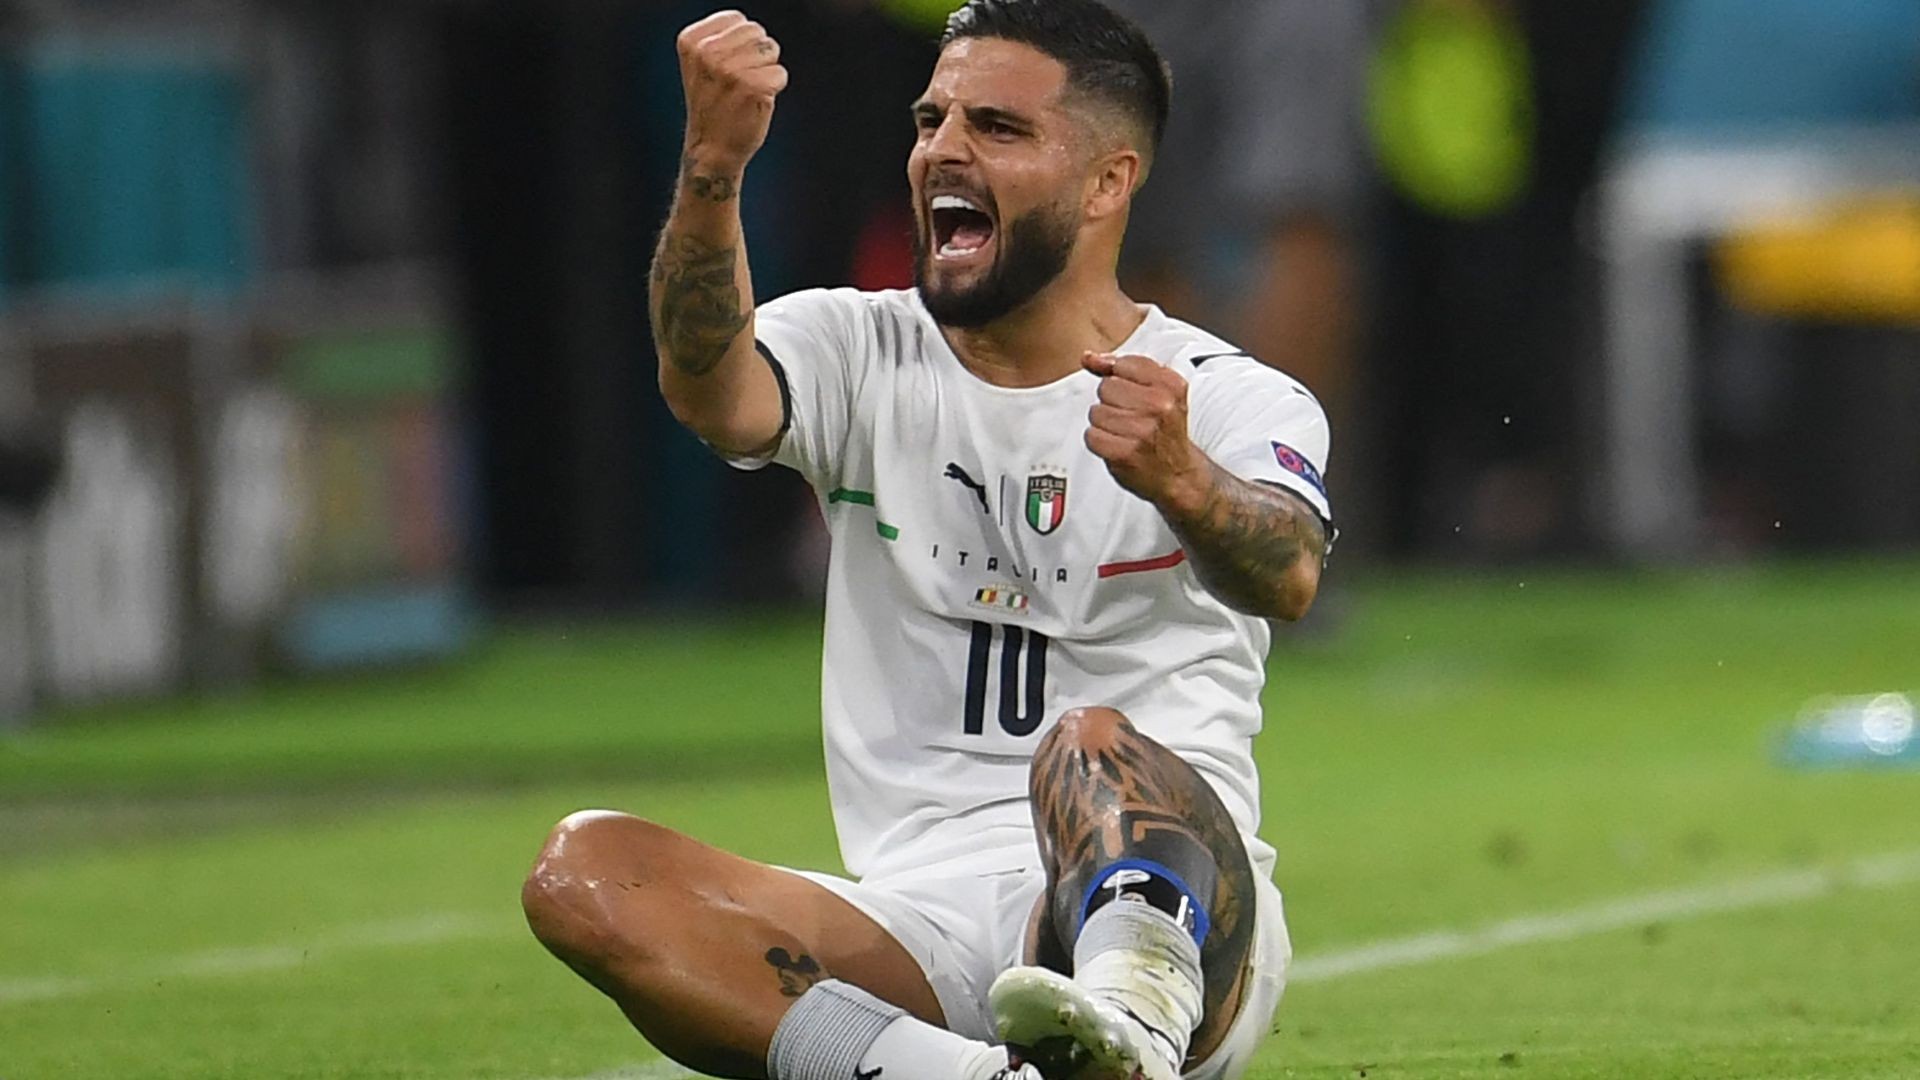 Insigne Heartwarming Celebration After Scoring for Italy